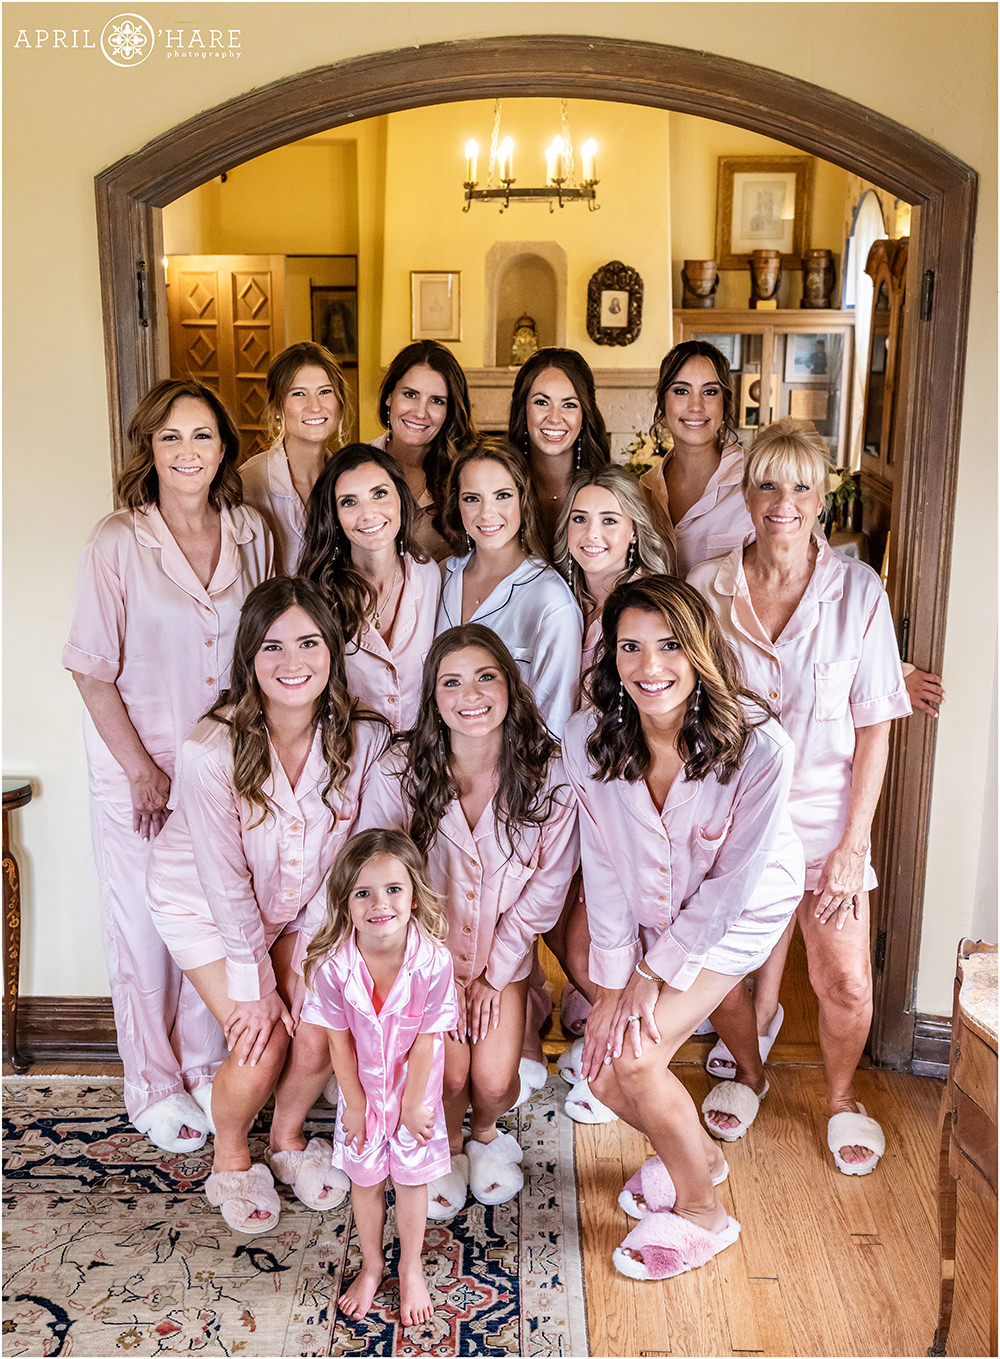 Bride surrounded by her family and friends all wearing matching pink silk pjs at a historic Castle wedding in Colorado